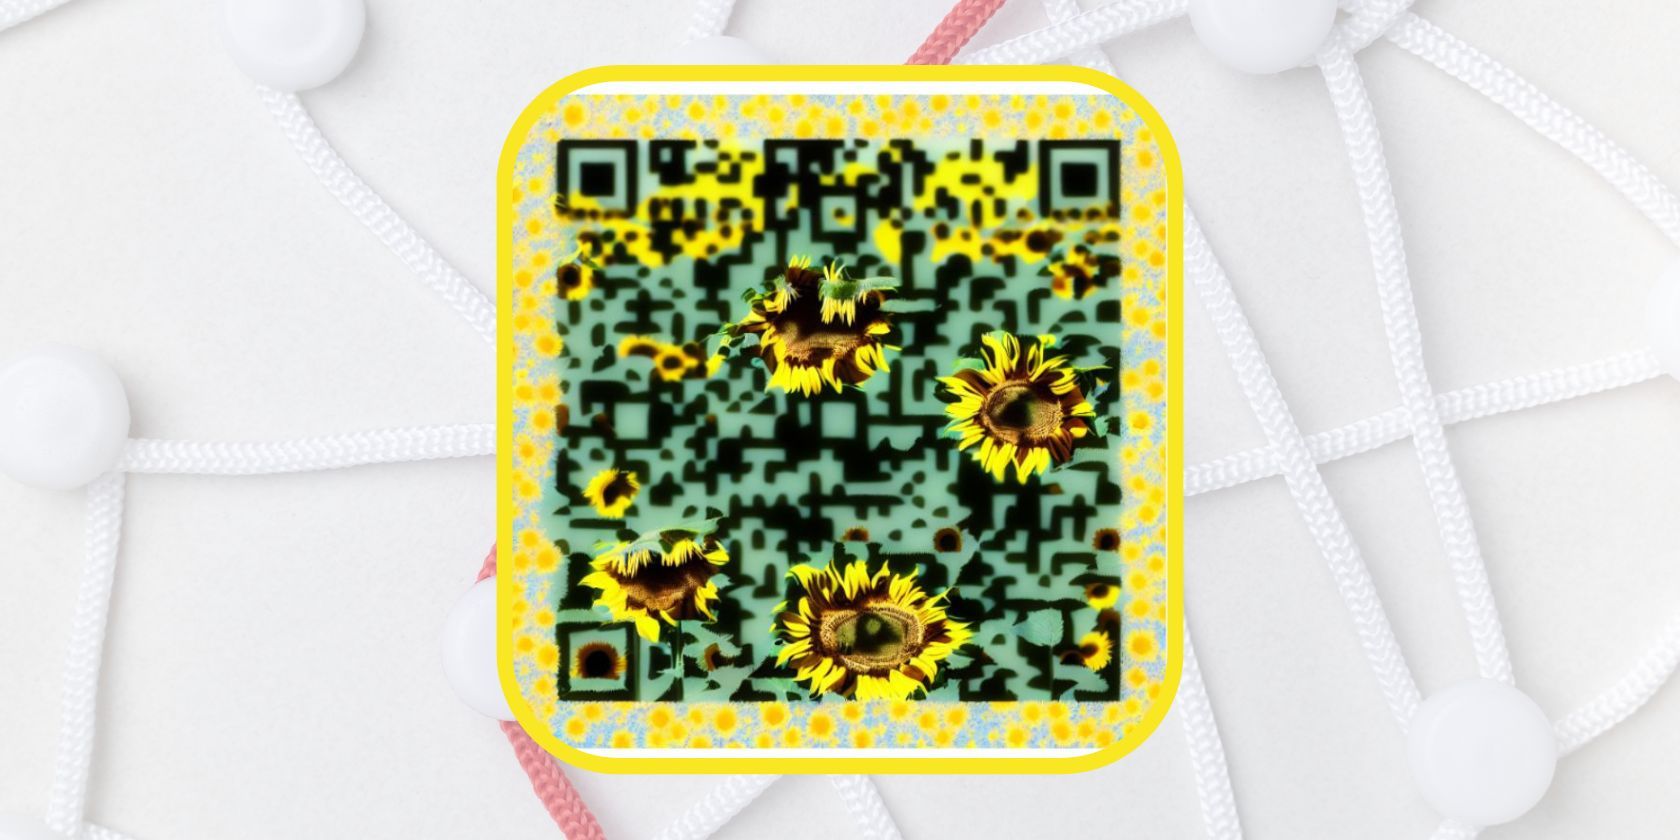 Image of a QR code embedded with sunflowers